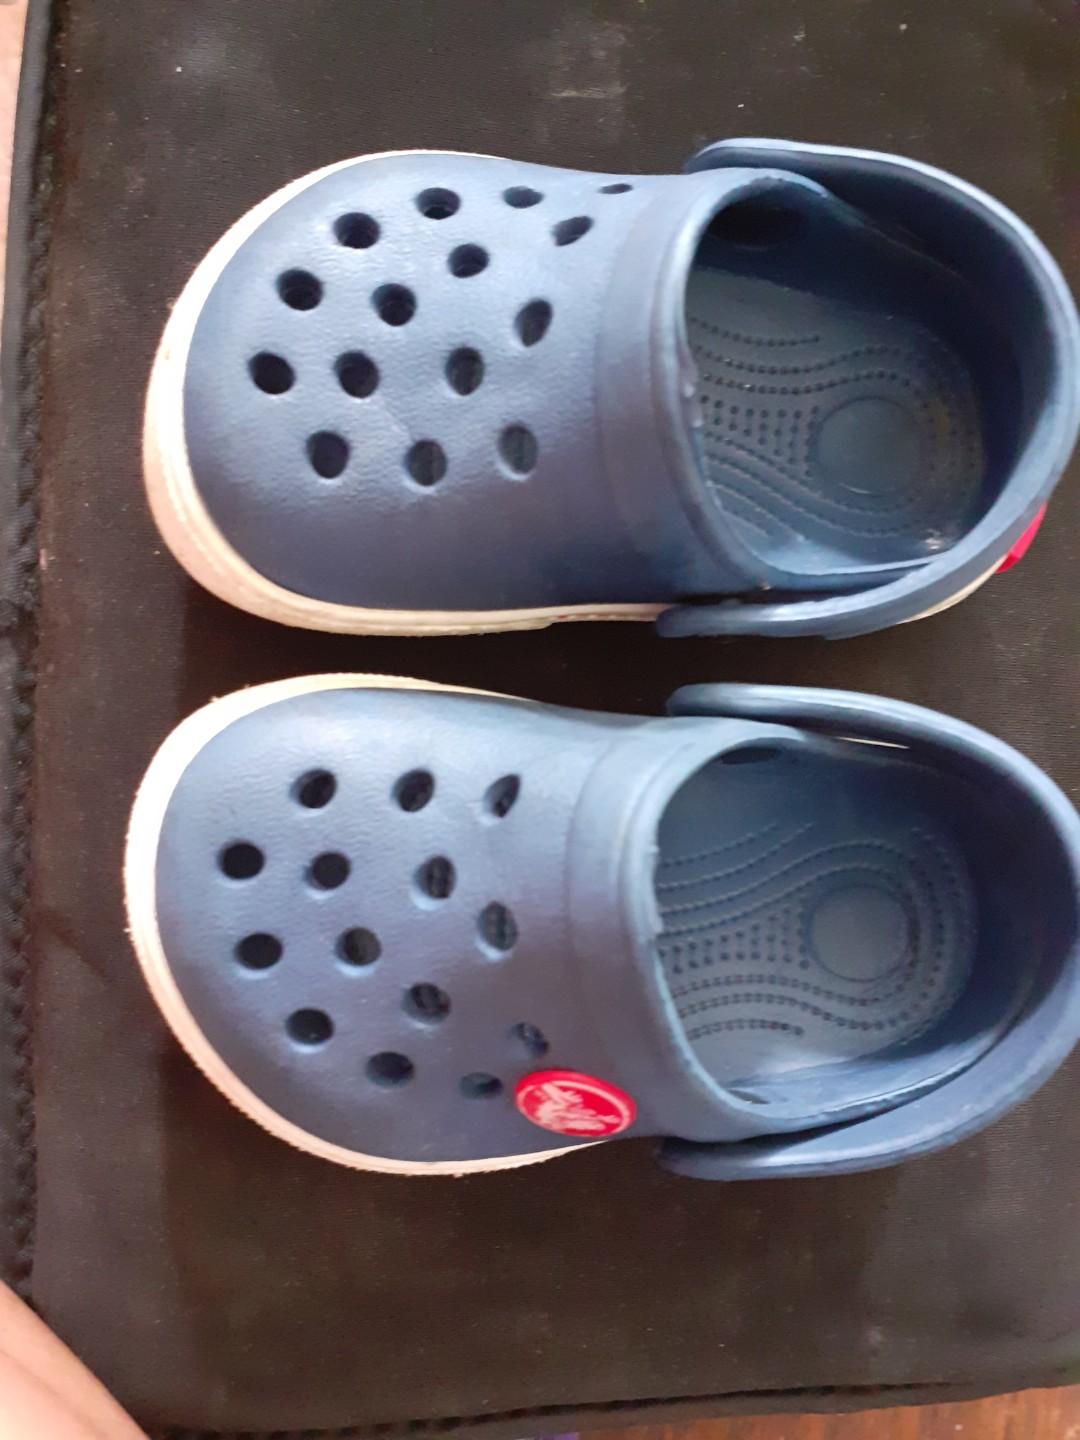 crocs shoes for baby boy